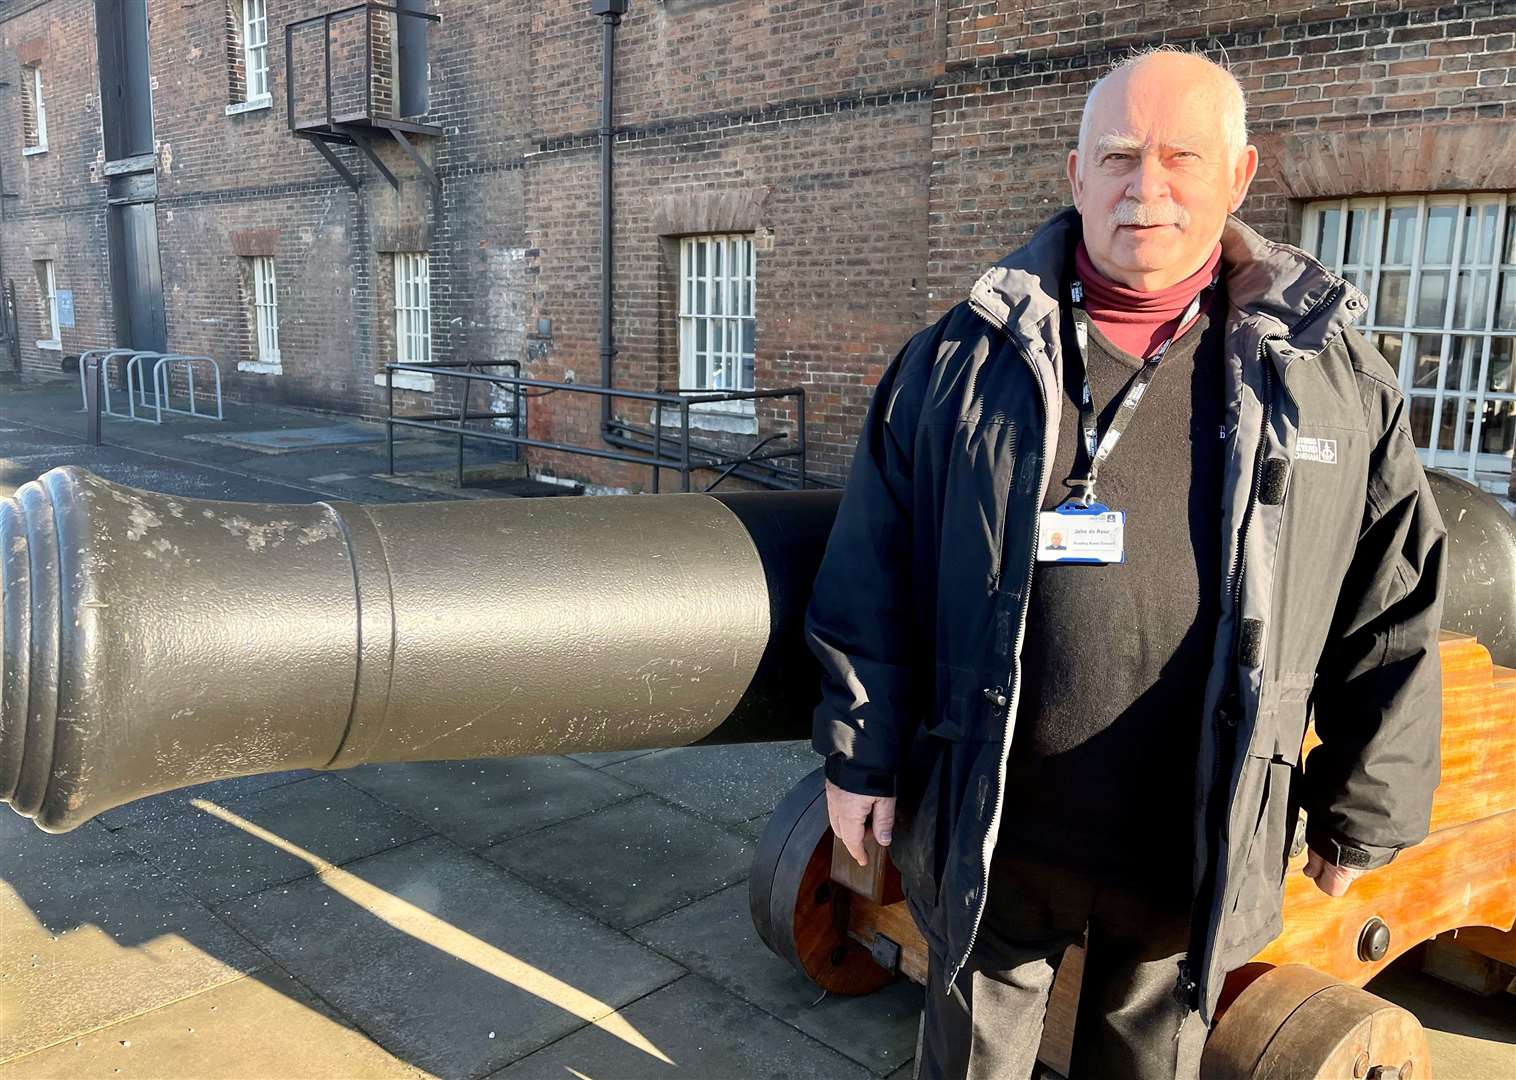 John De Rose former Shipwright and now volunteer at The Historic Dockyard Chatham